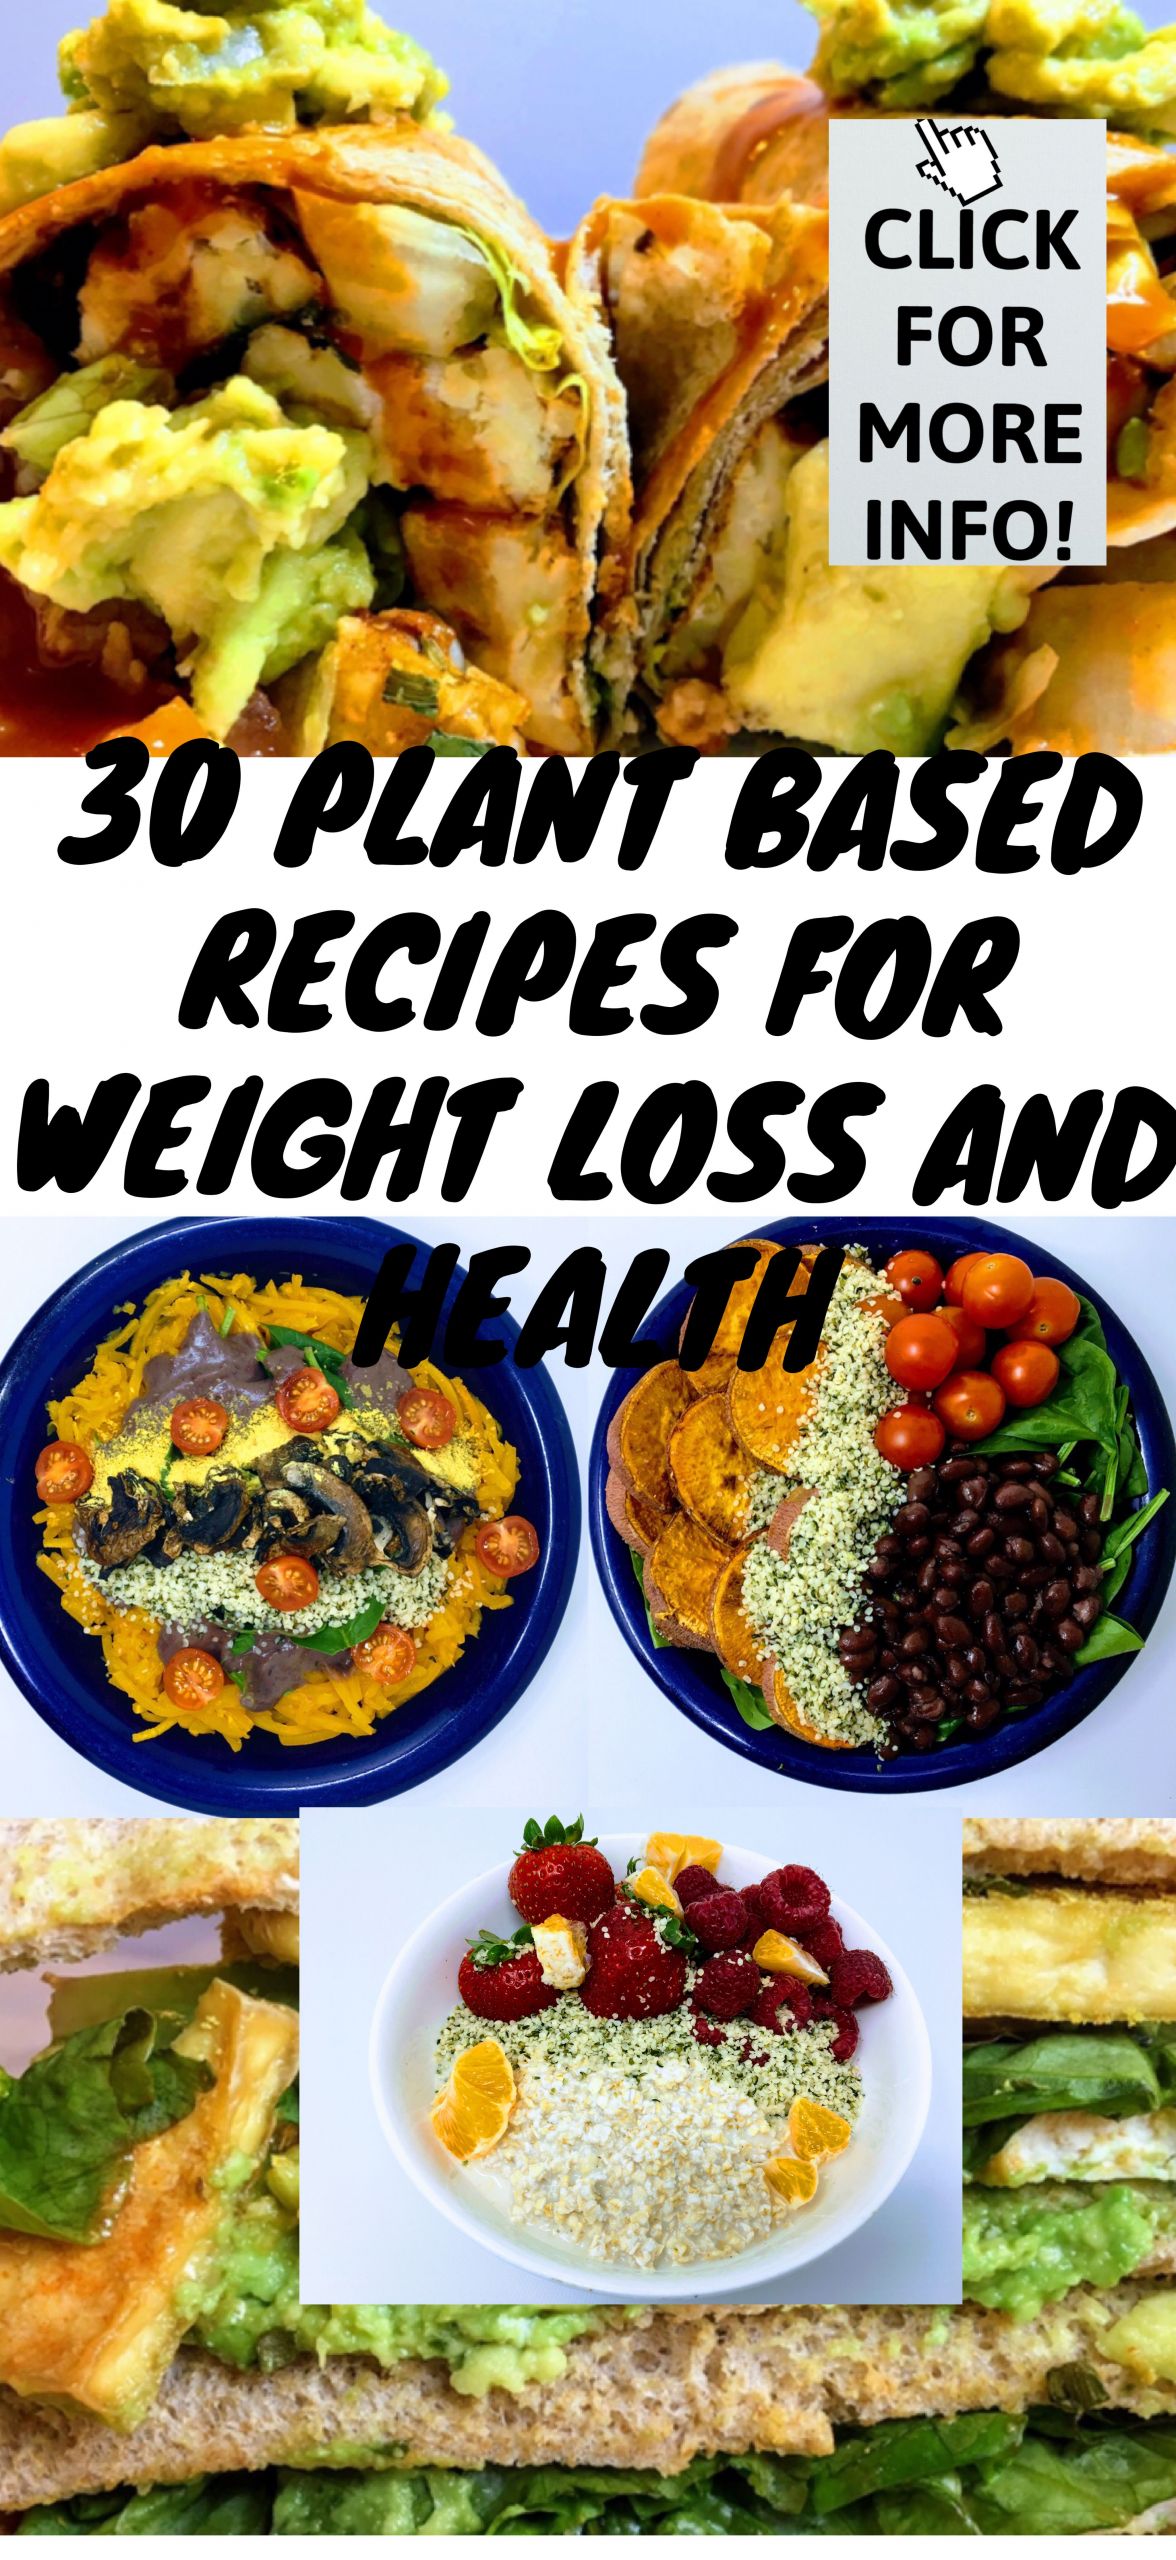 Plant Based Weight Loss Meal Plan
 Pin on weight loss